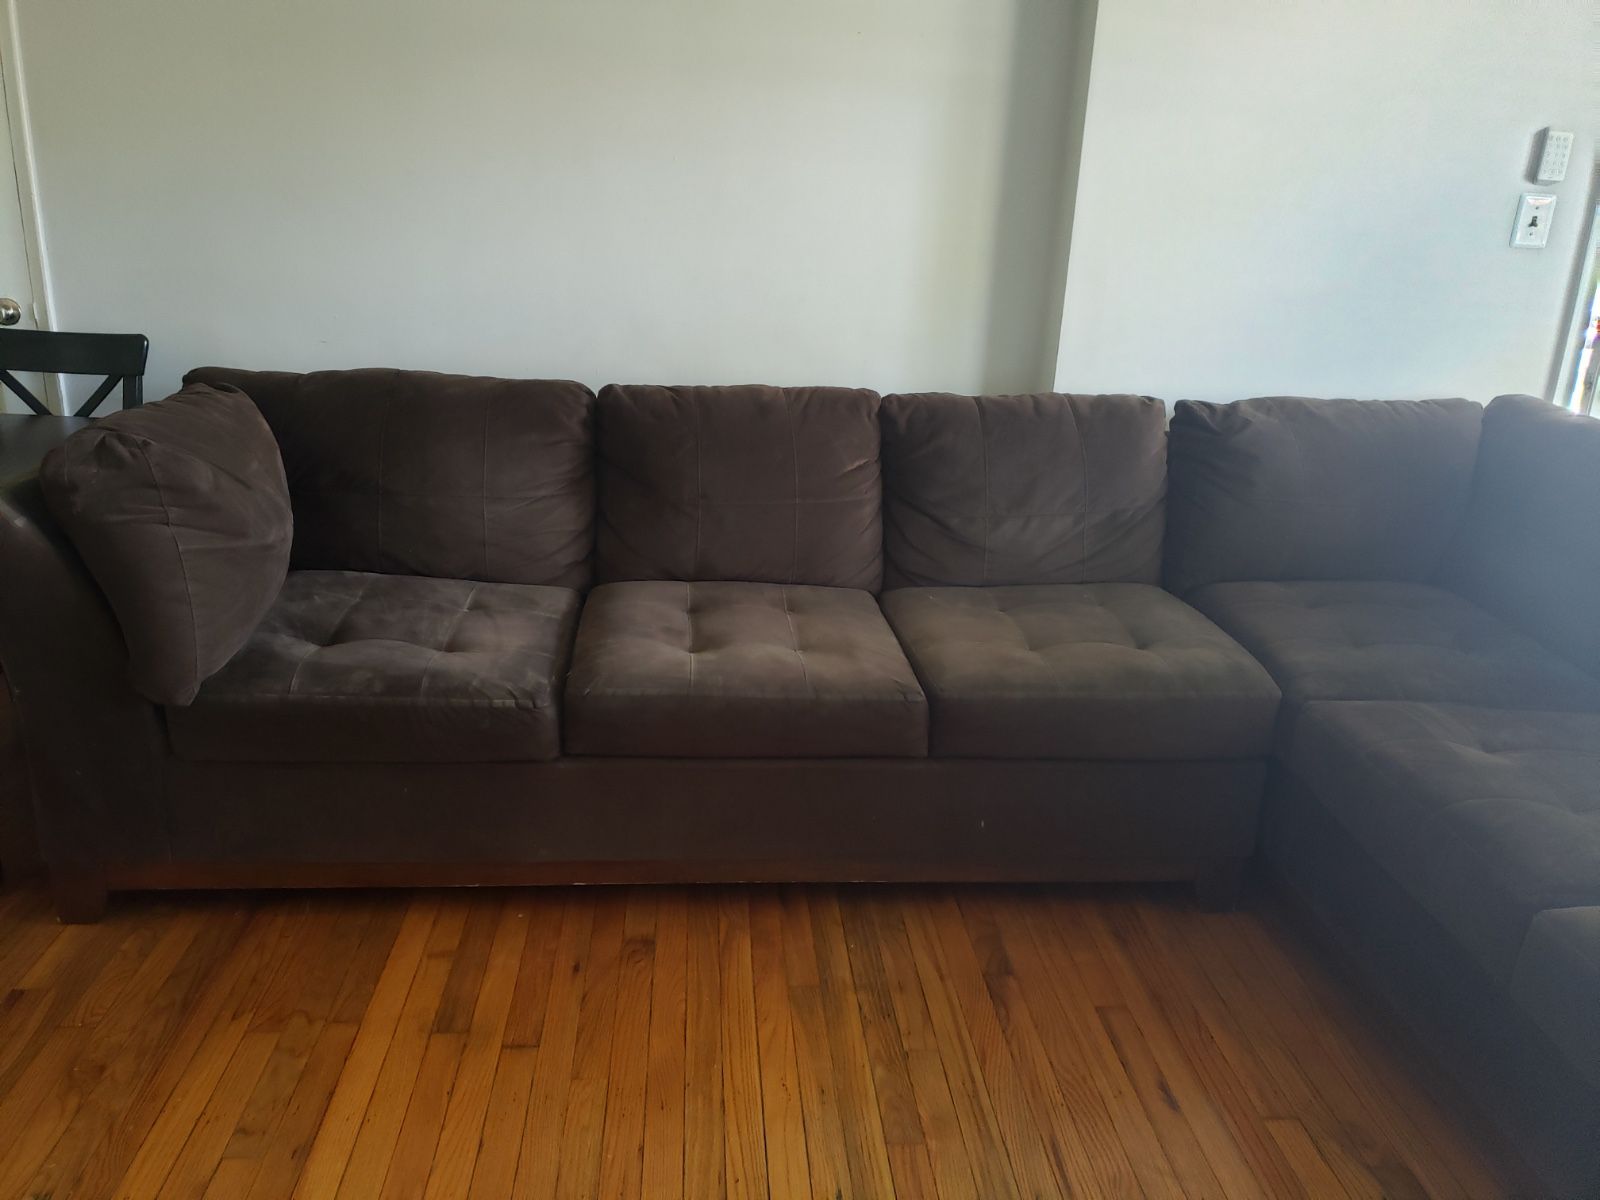 Brown Microfiber sectional couch.